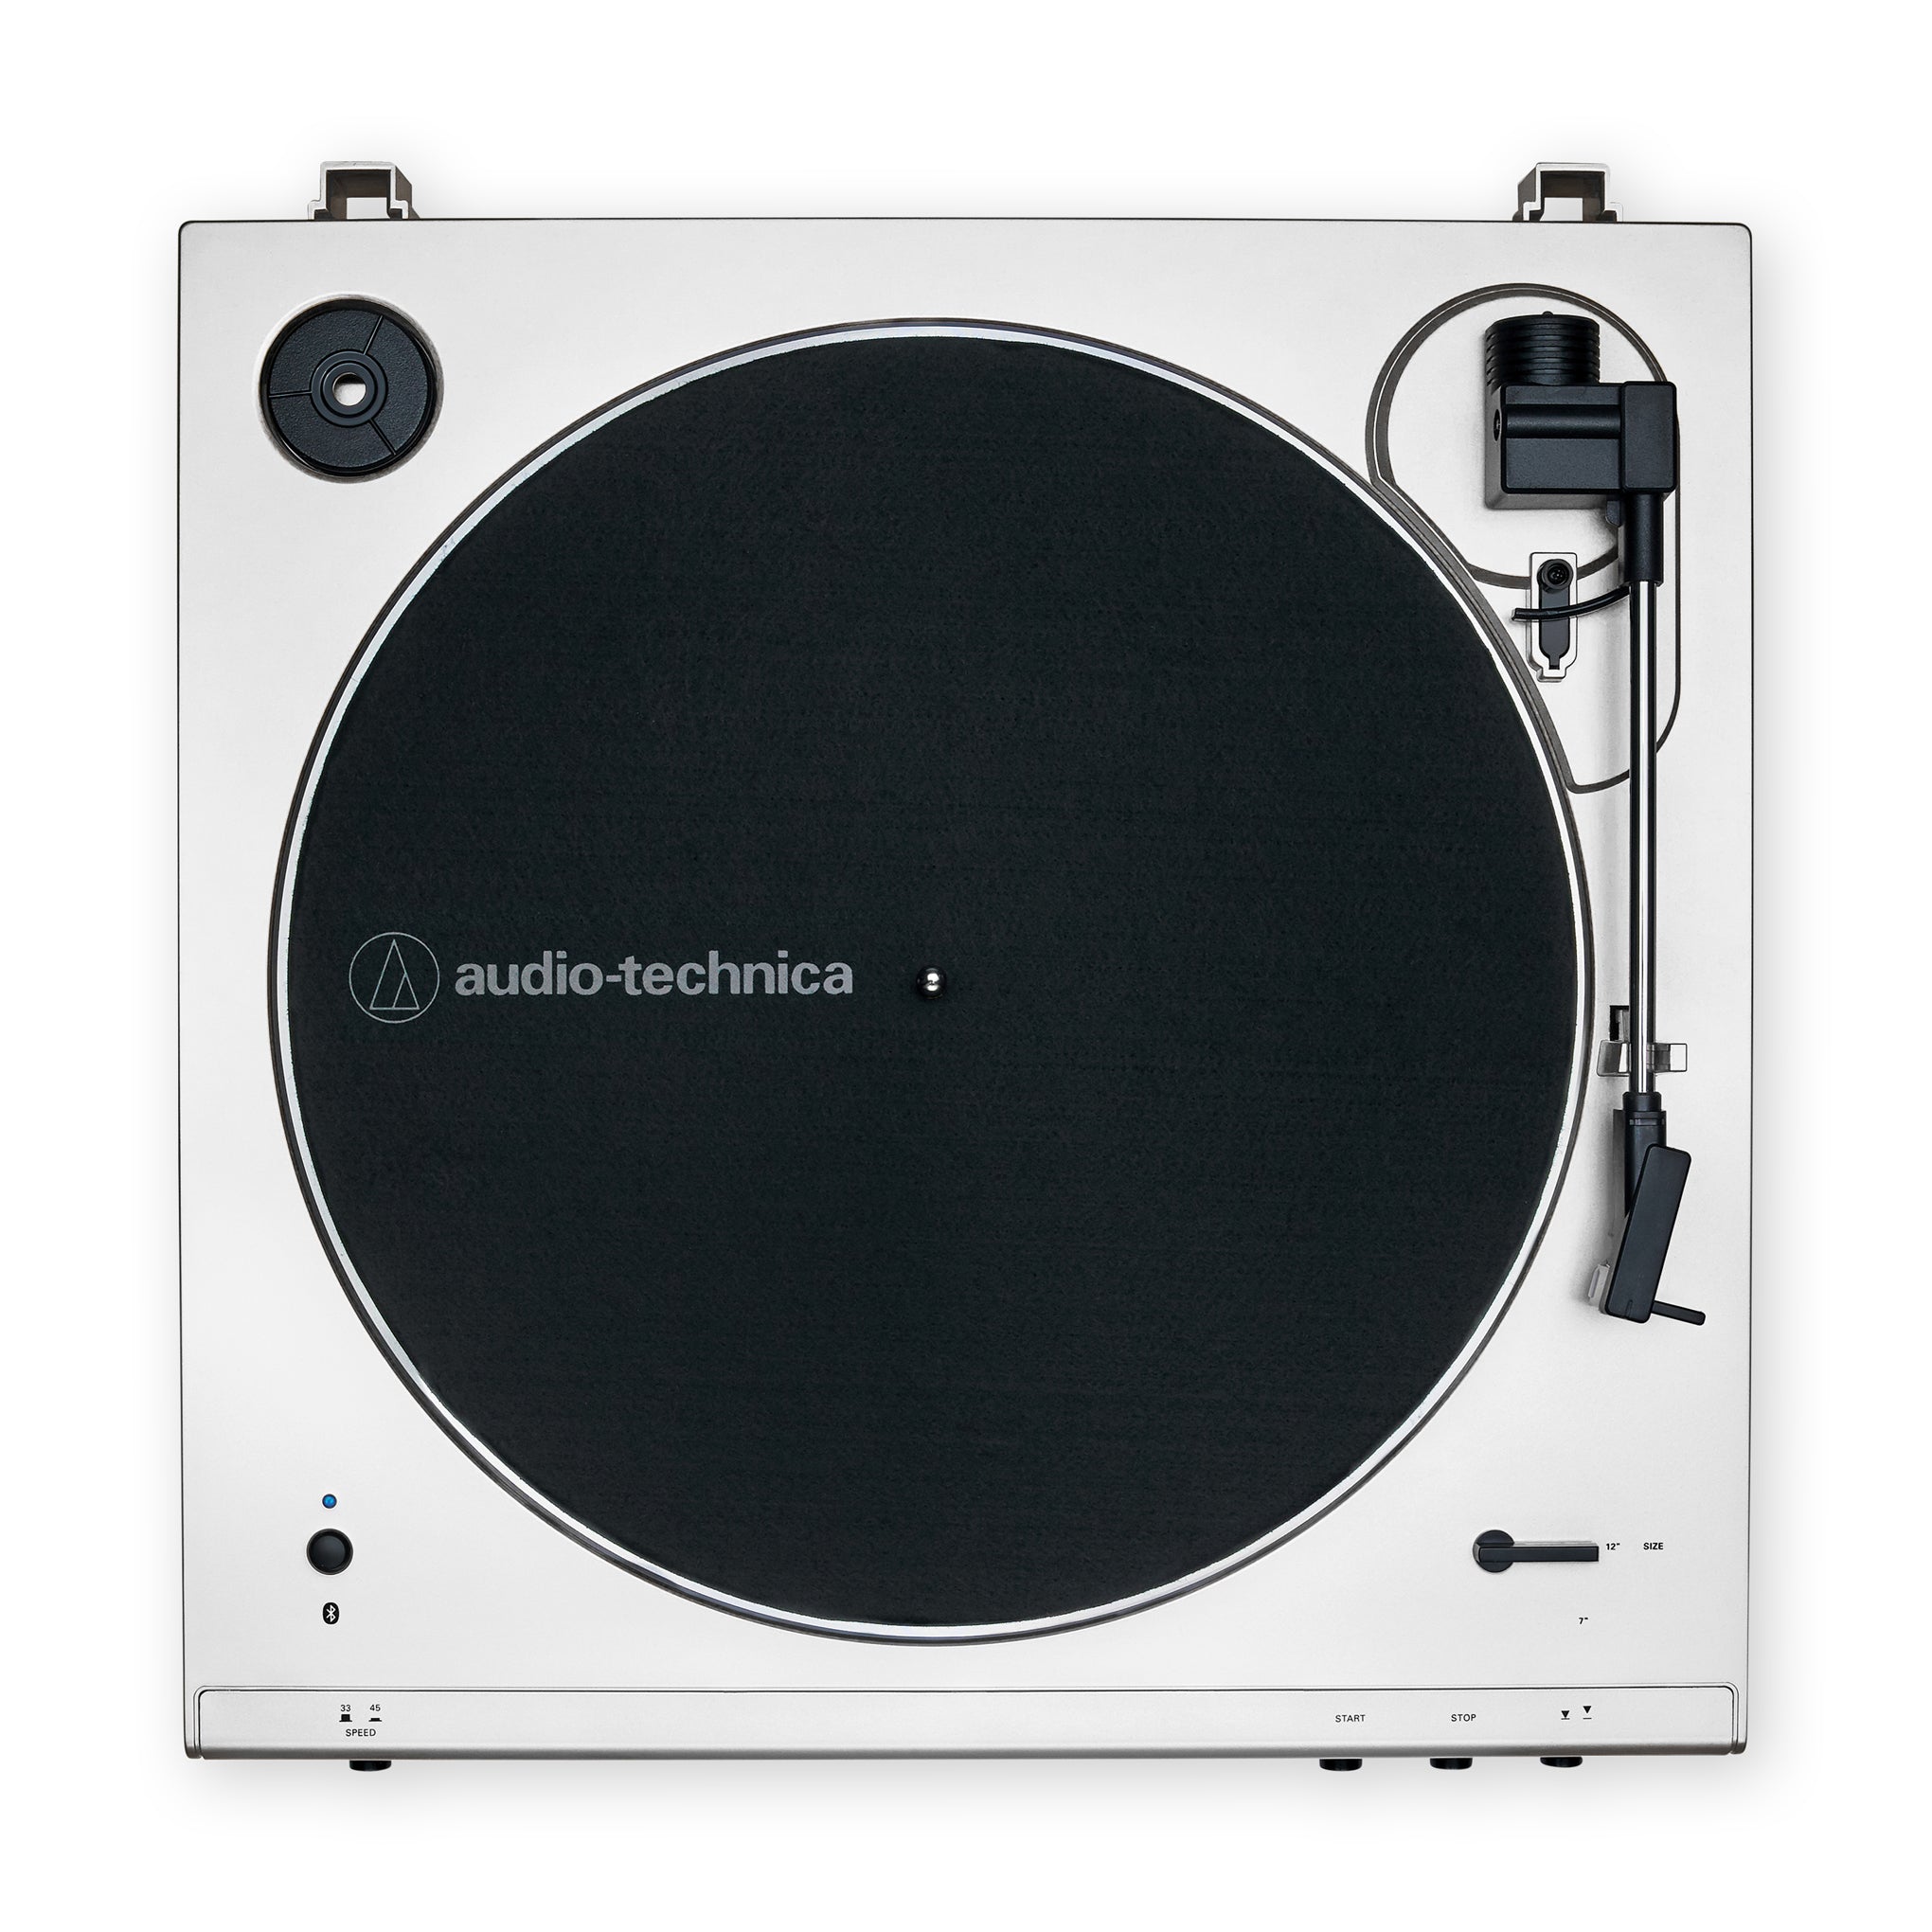 Audio-Technica AT-LP60XBT-WW Turntable Bluetooth Store – MoMA Design